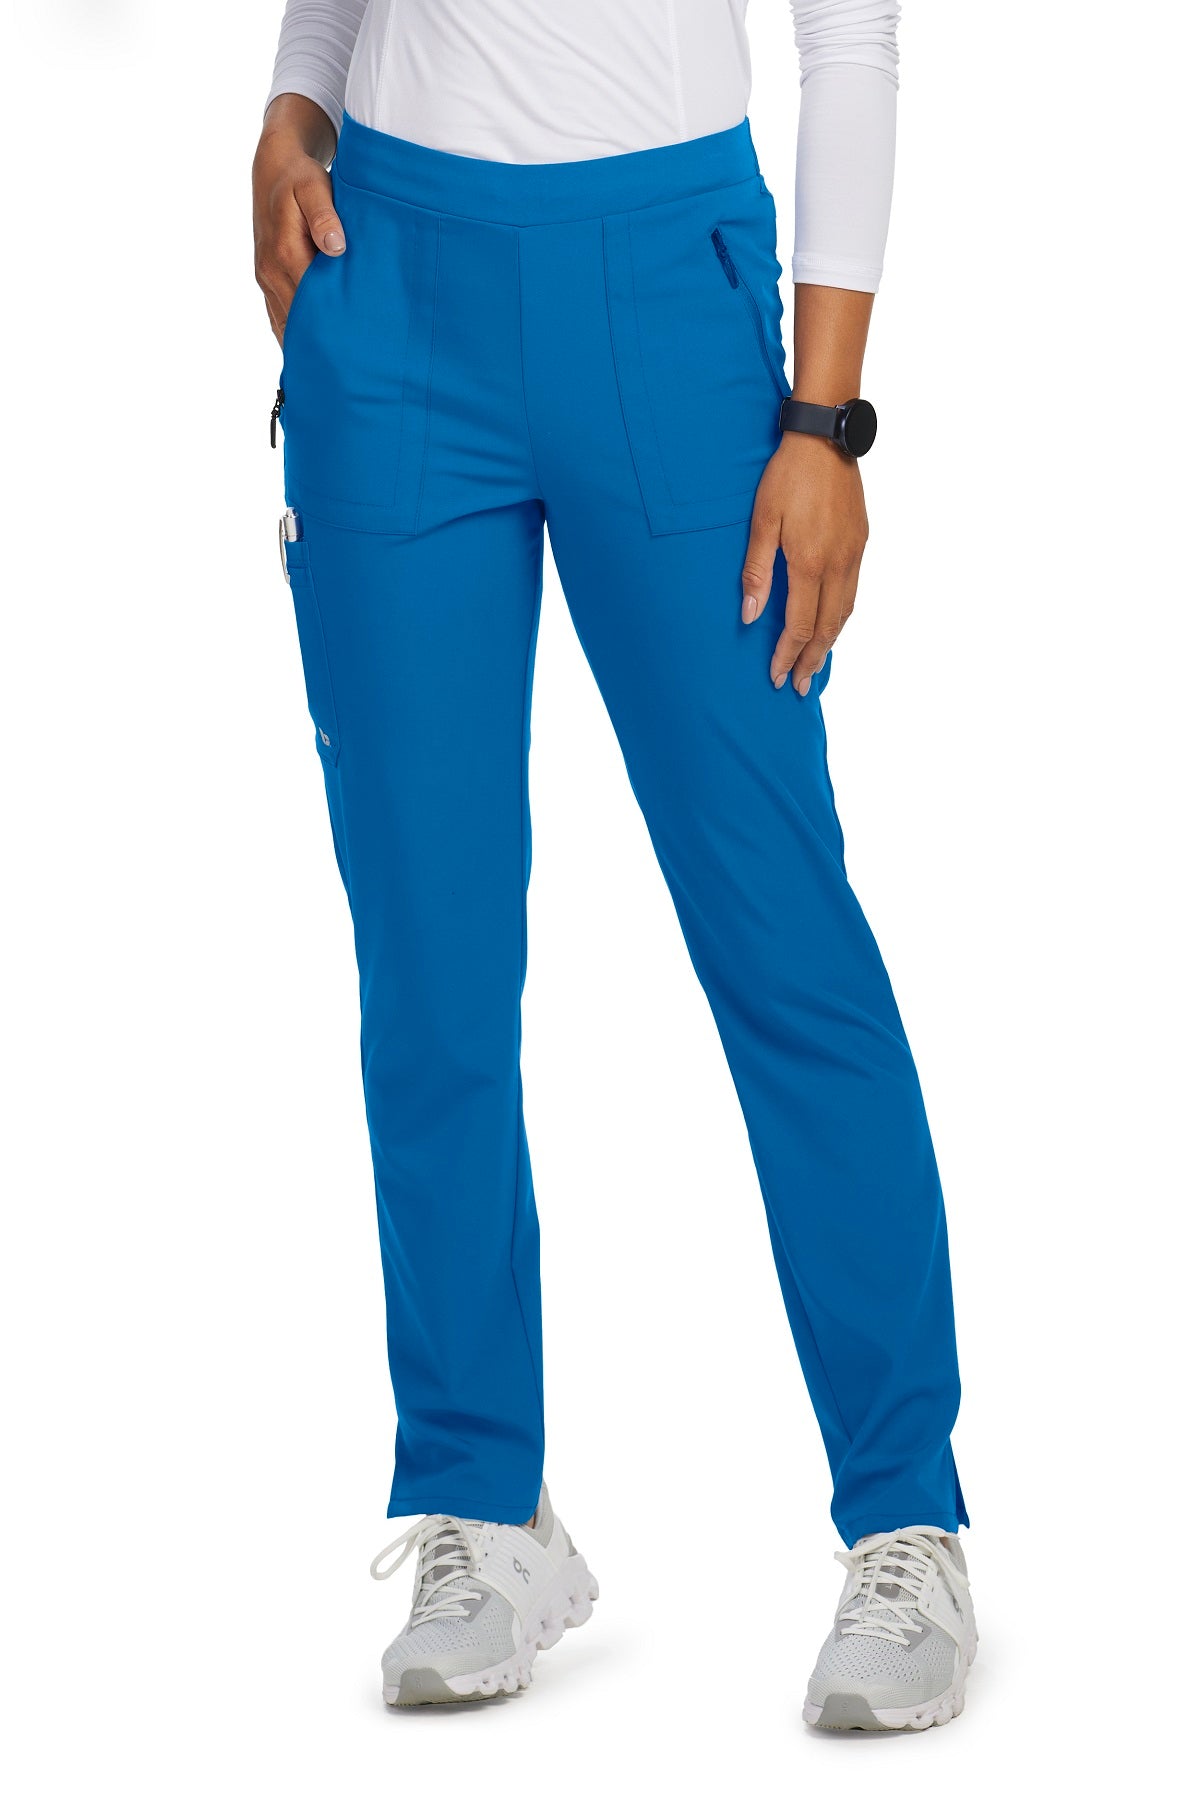 Barco Unify Scrub Pants Purpose 5 Pocket in New Royal at Parker's Clothing and Shoes.